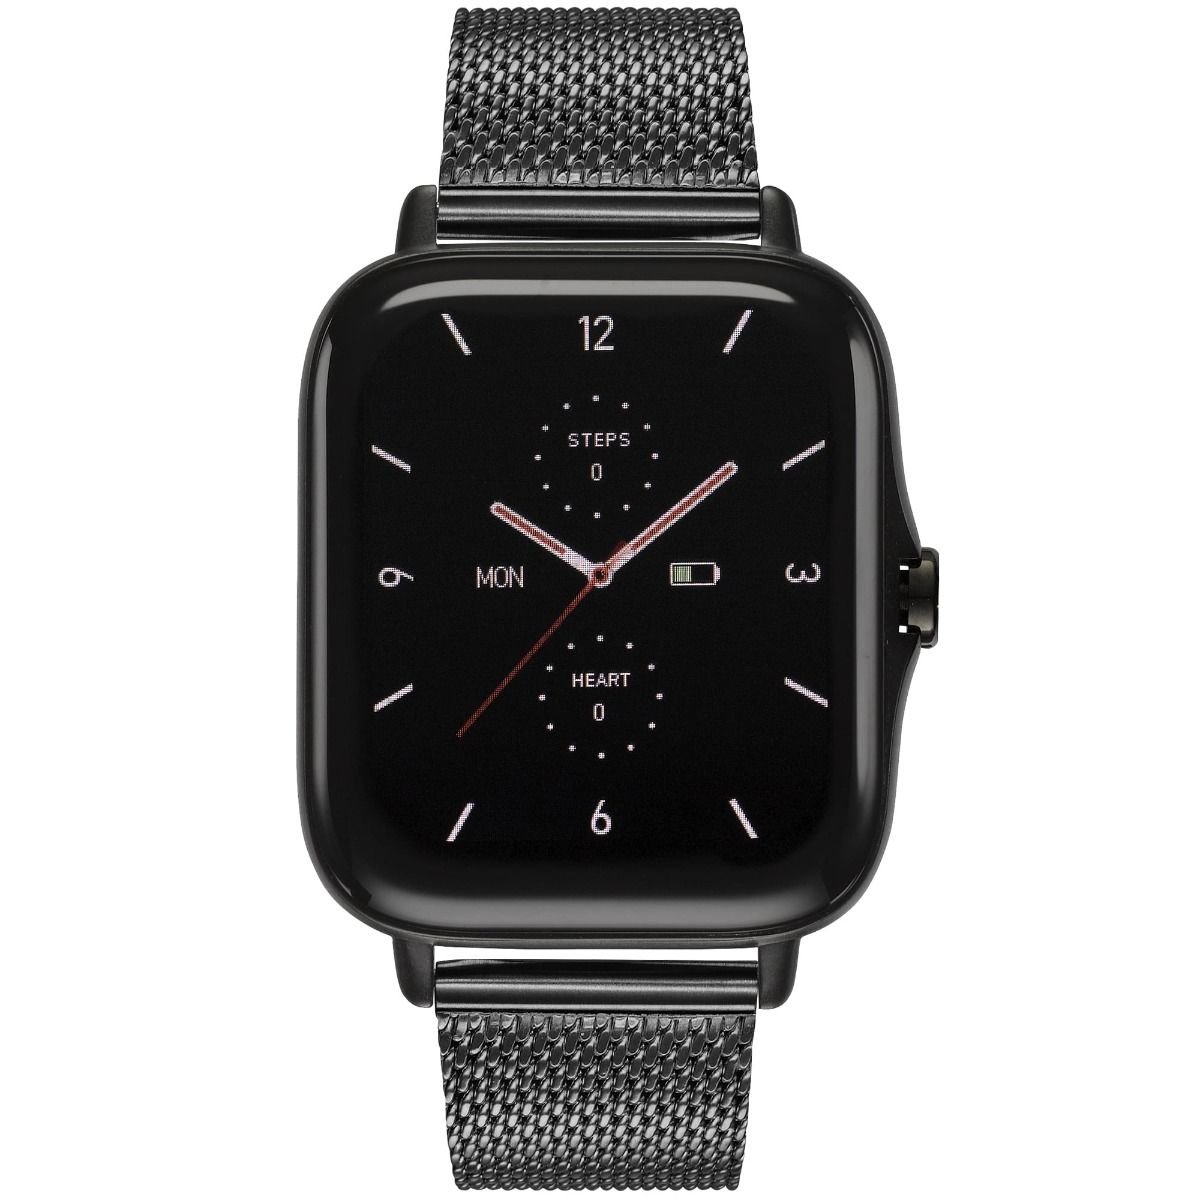 Storm SM2 Smart Watch with Mesh Strap In Black Watches Storm London 